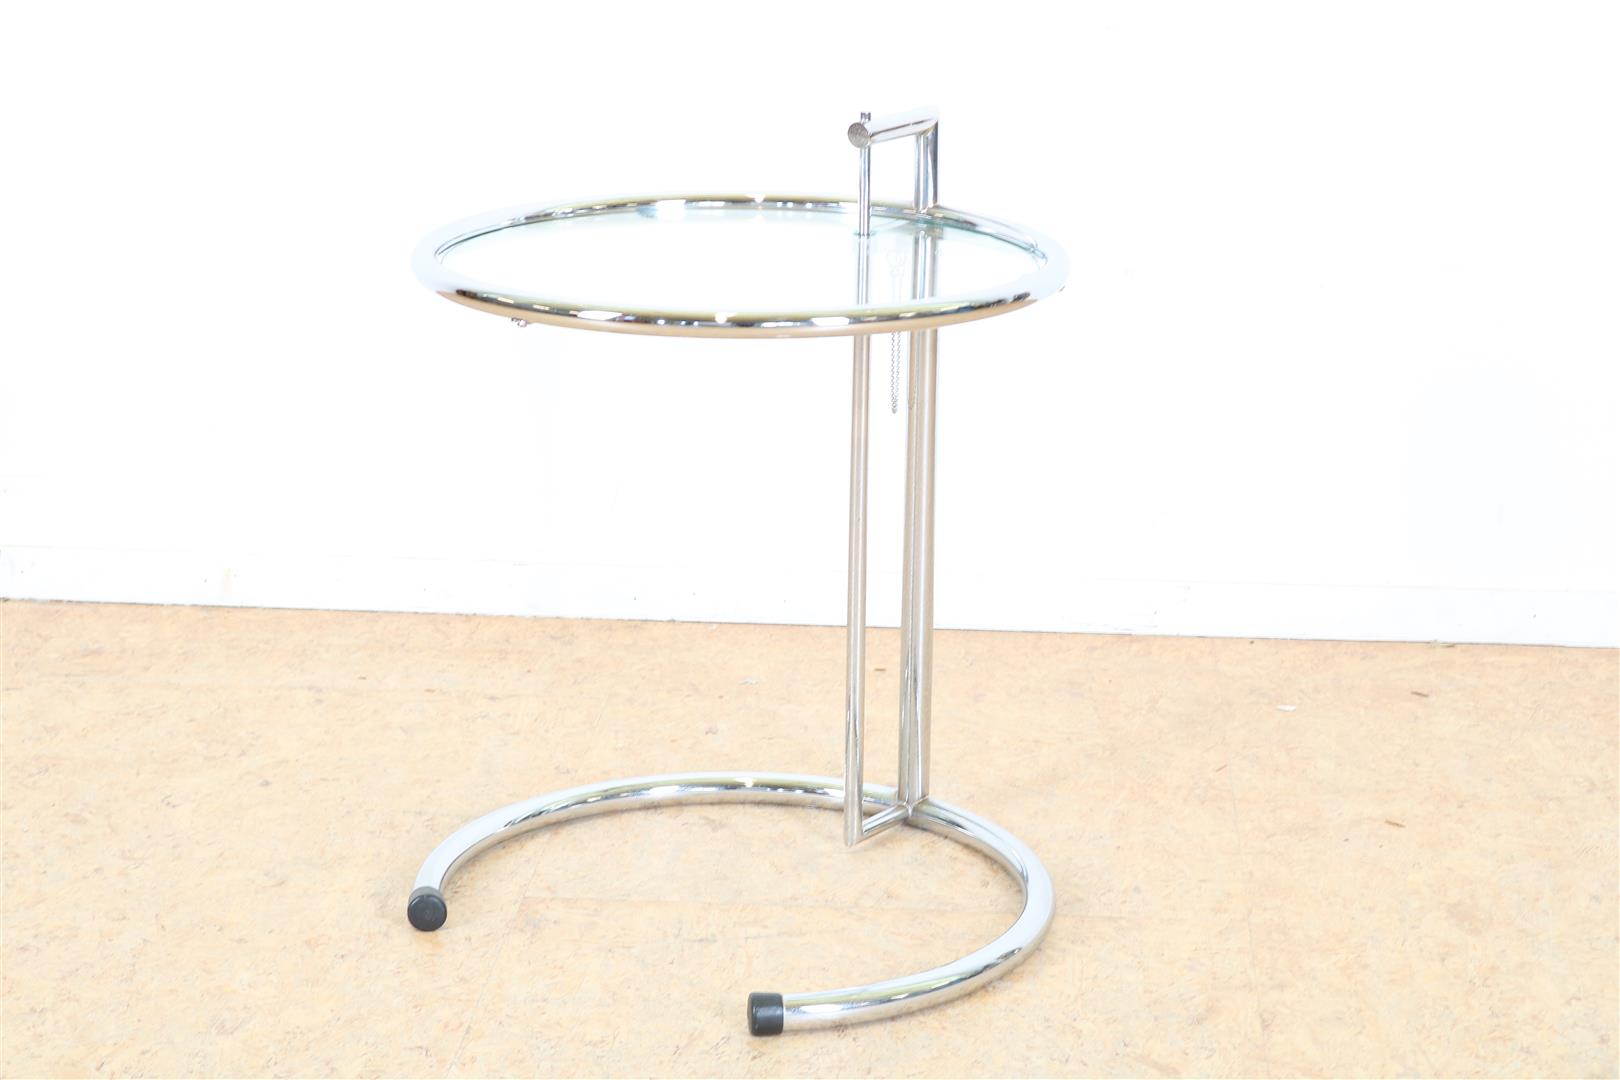 Chrome-plated side table with glass top, design after Eileen Gray model Adjustable table E1027, 63 x